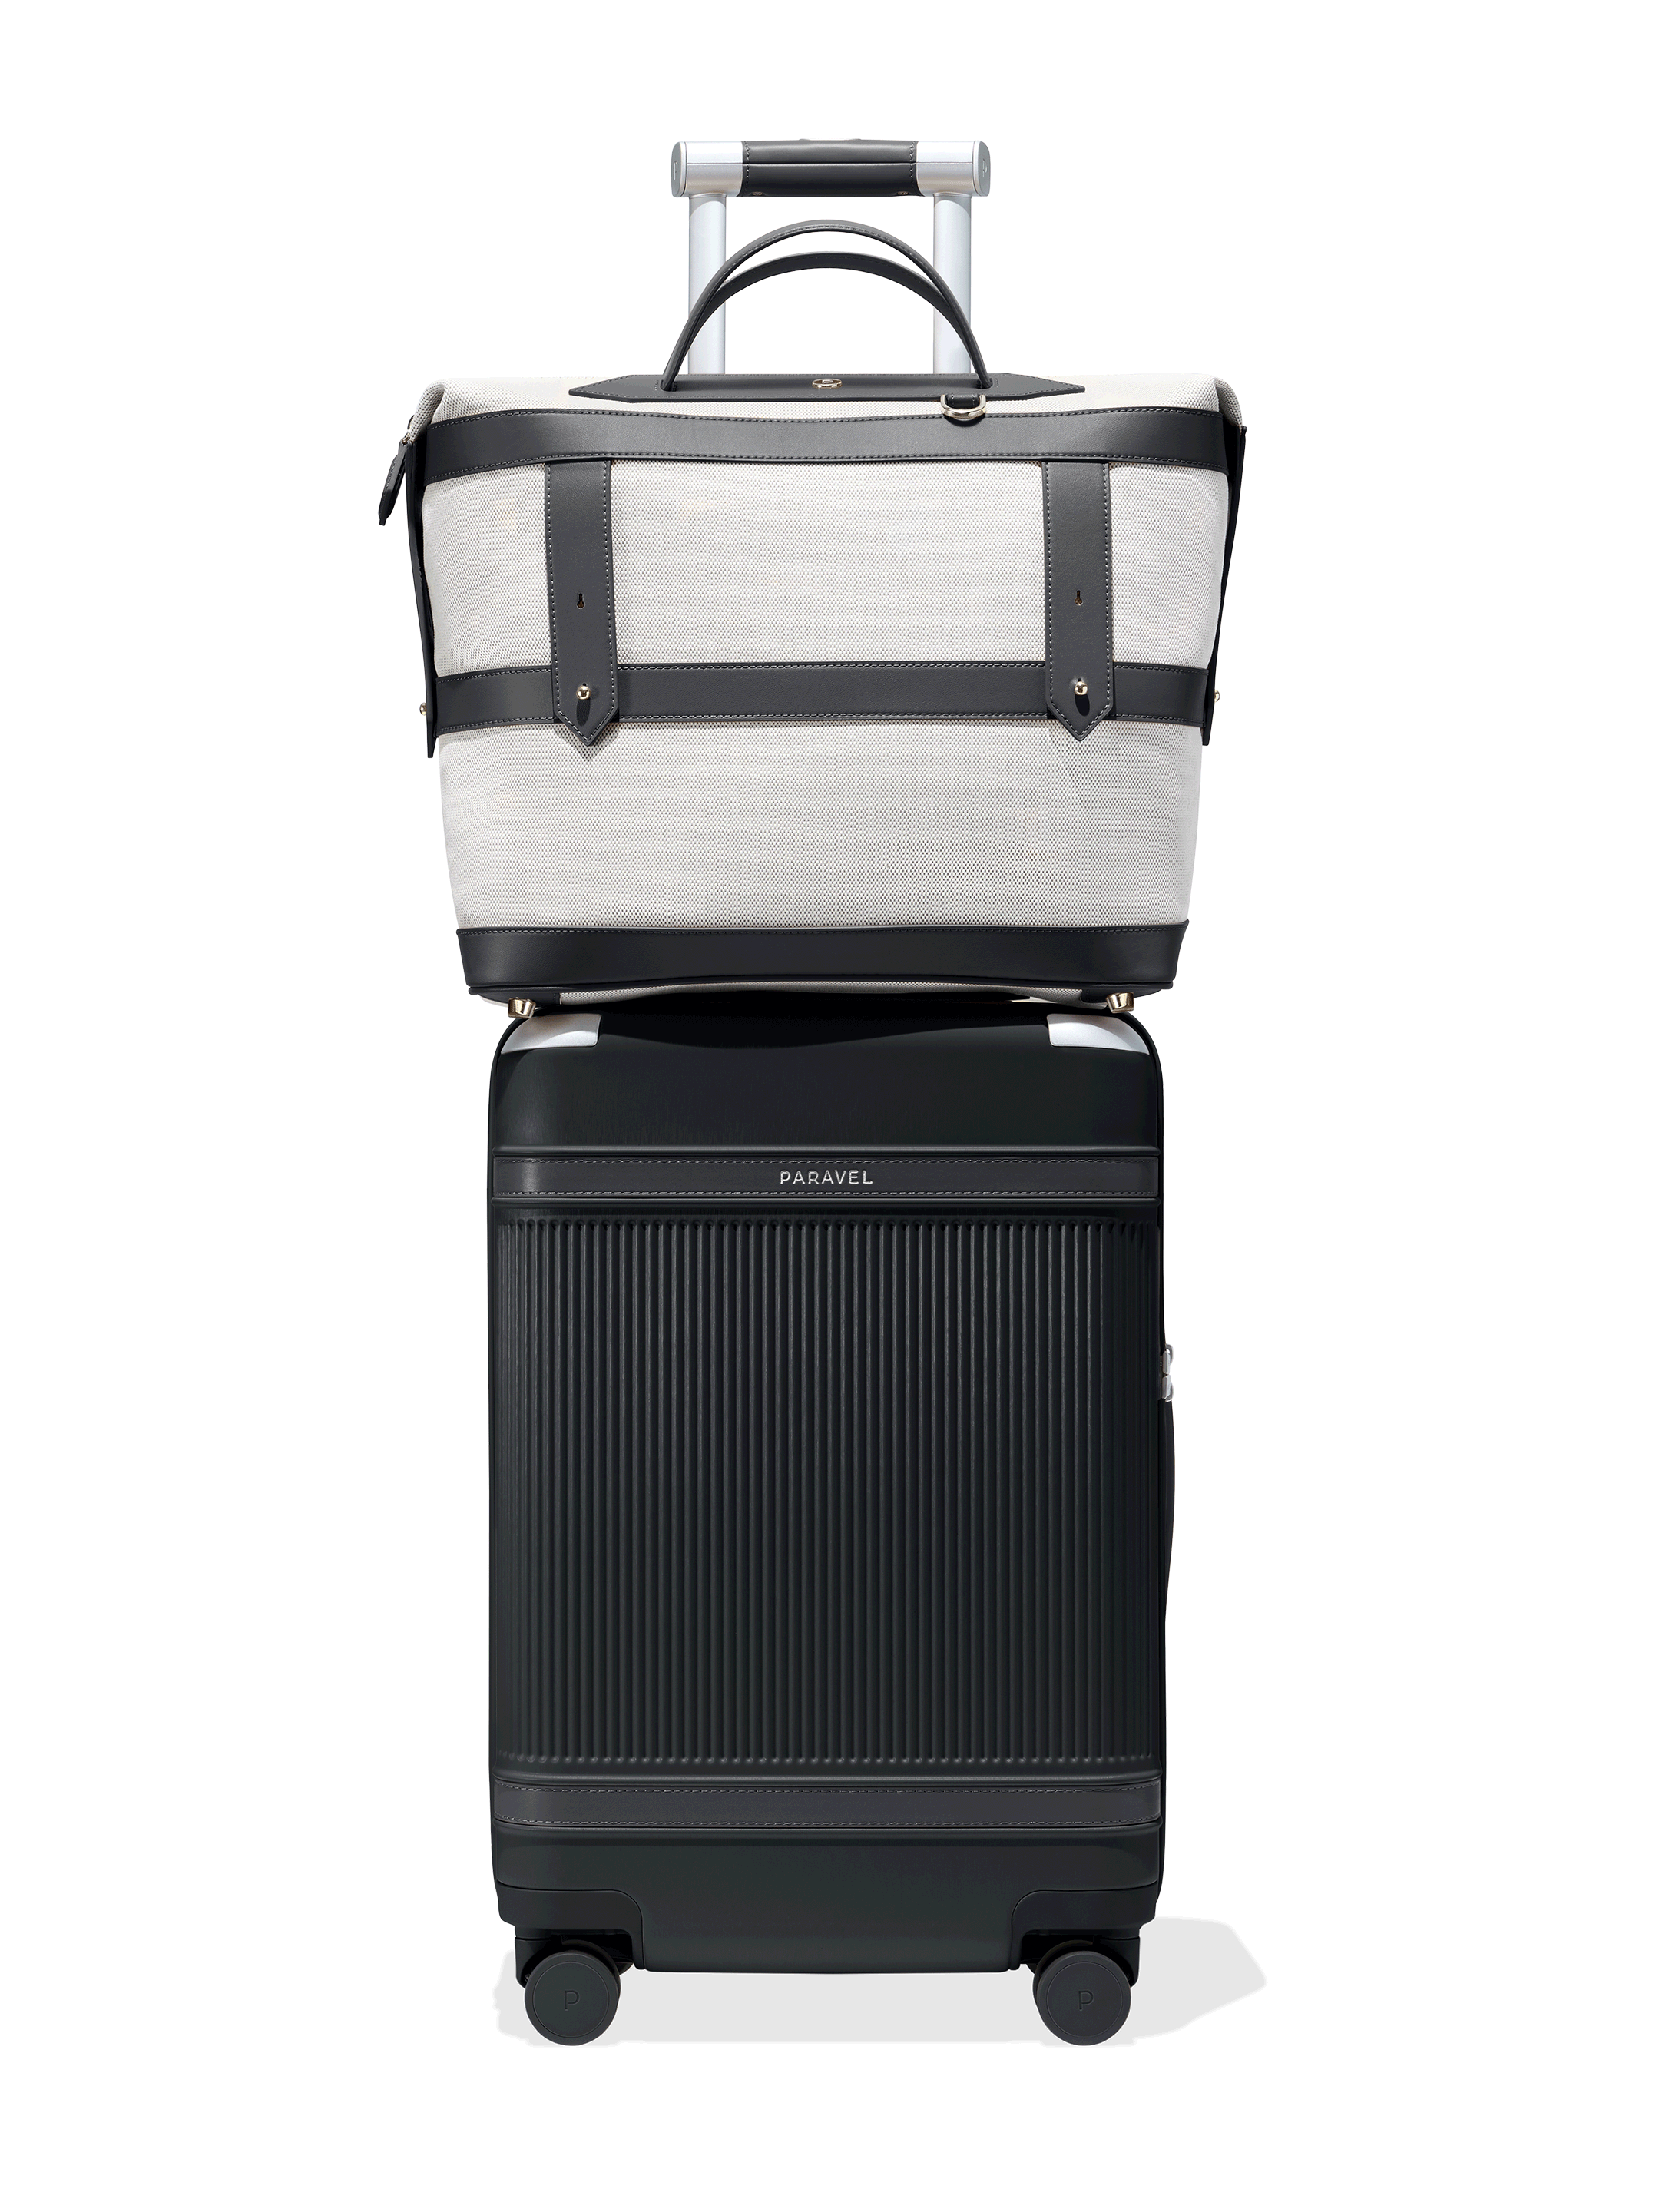 The Weekender Travel Carry On Bag in Black with Silver and Gold Stripes